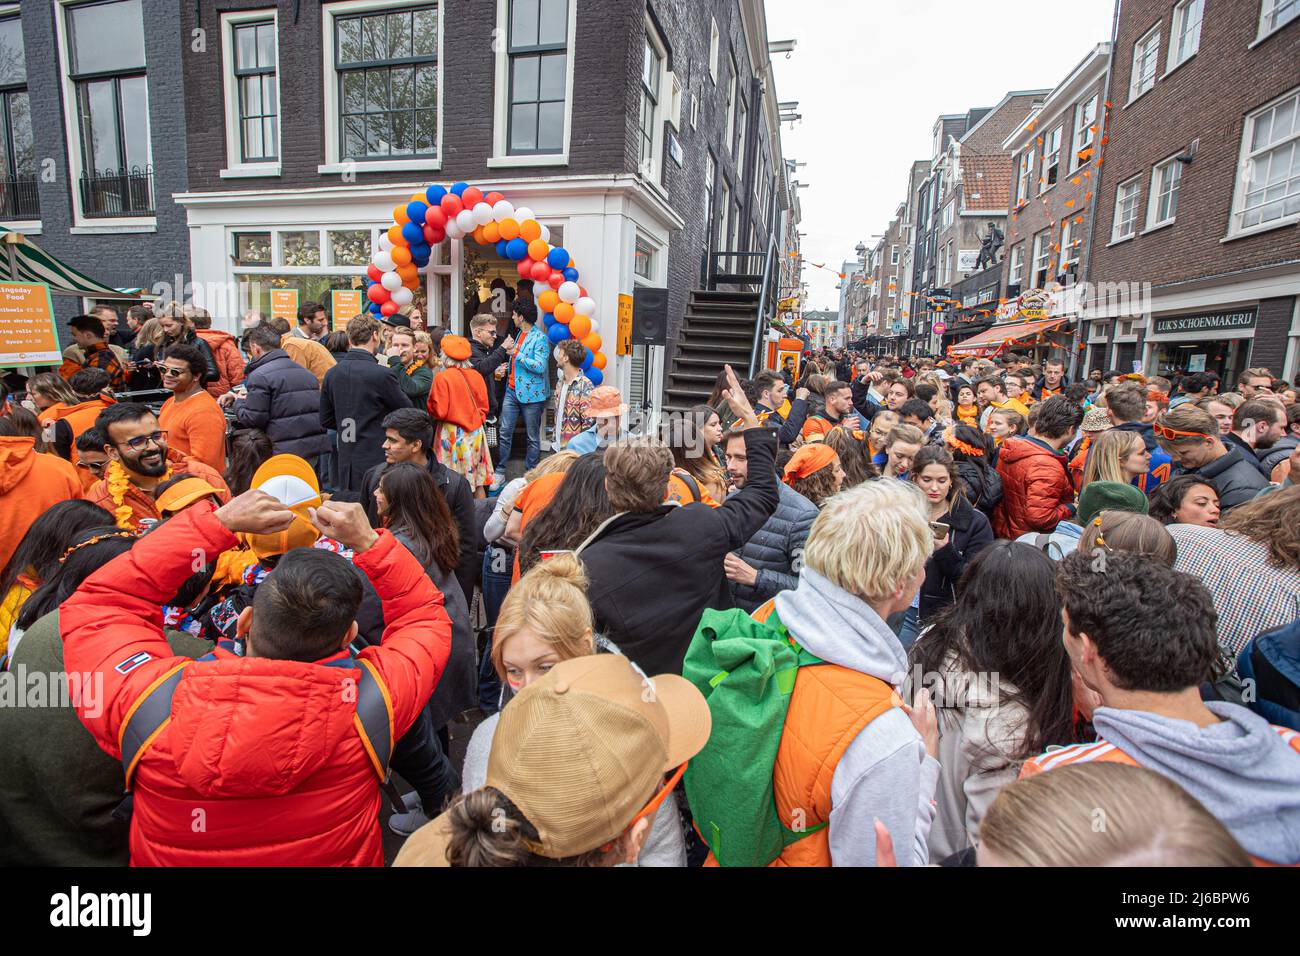 How to Celebrate King's Day in the Netherlands Like a Local